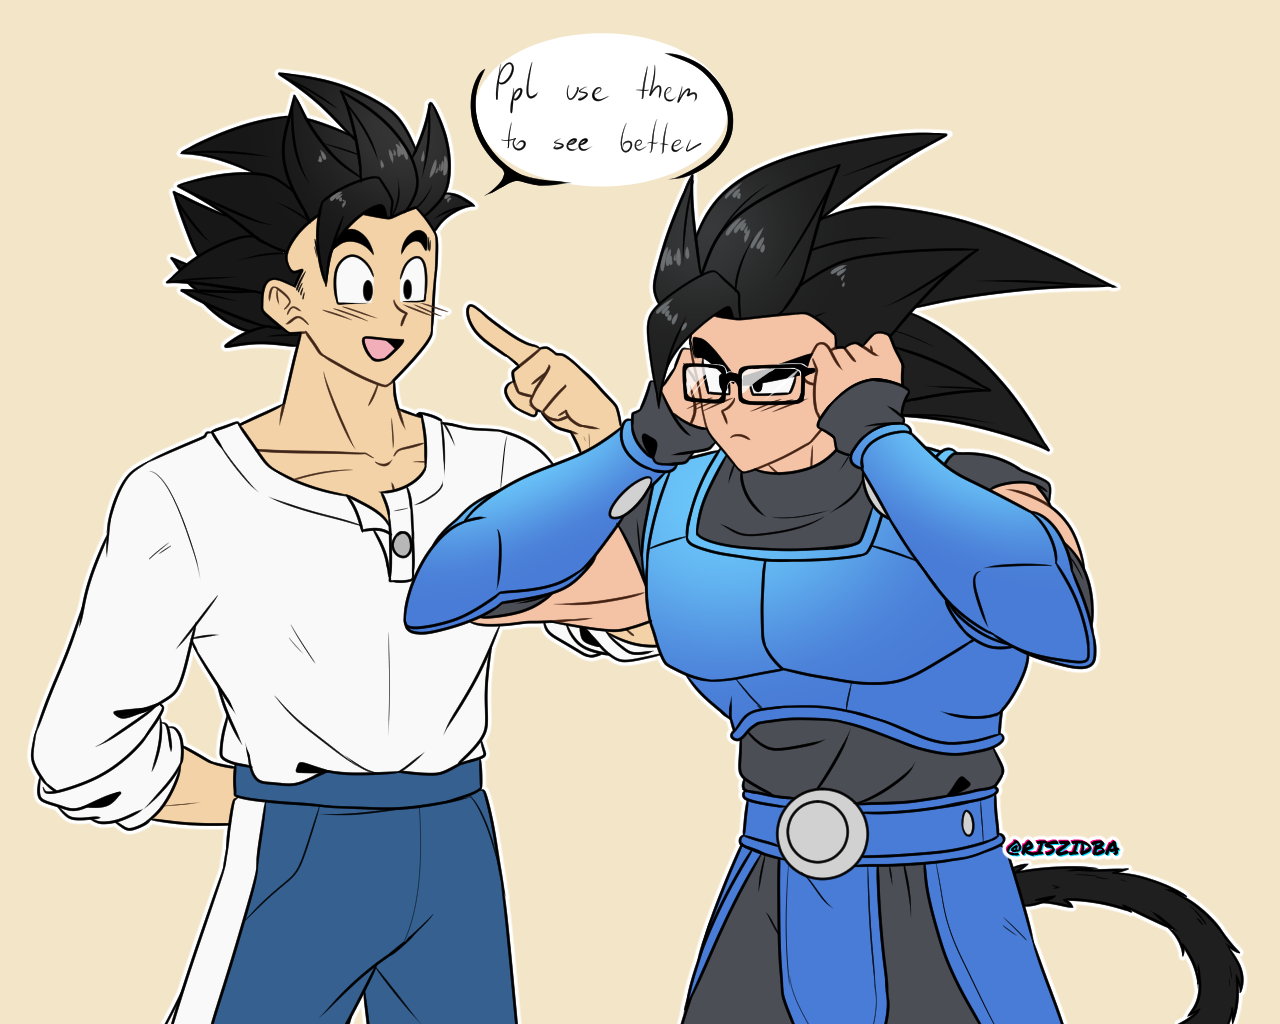 Rwac's Space🔞 - Shallot discovers Glasses by RisziDBA